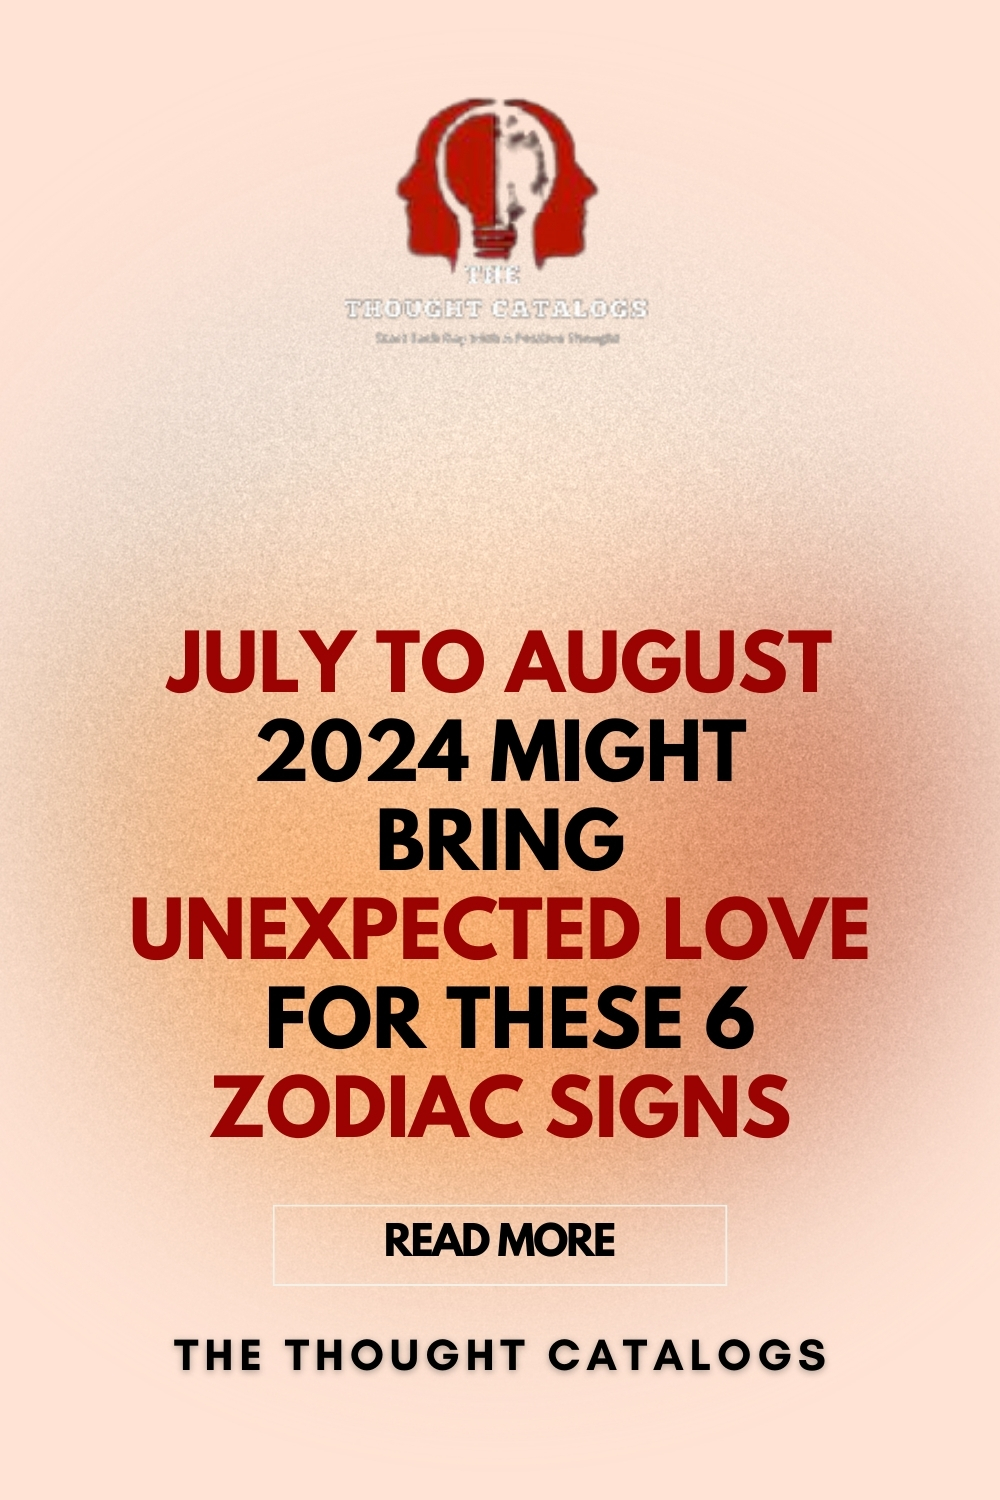 How Last 6 Months Of 2024 Affects Every Zodiac Sign’s Love Life (Single & Taken)